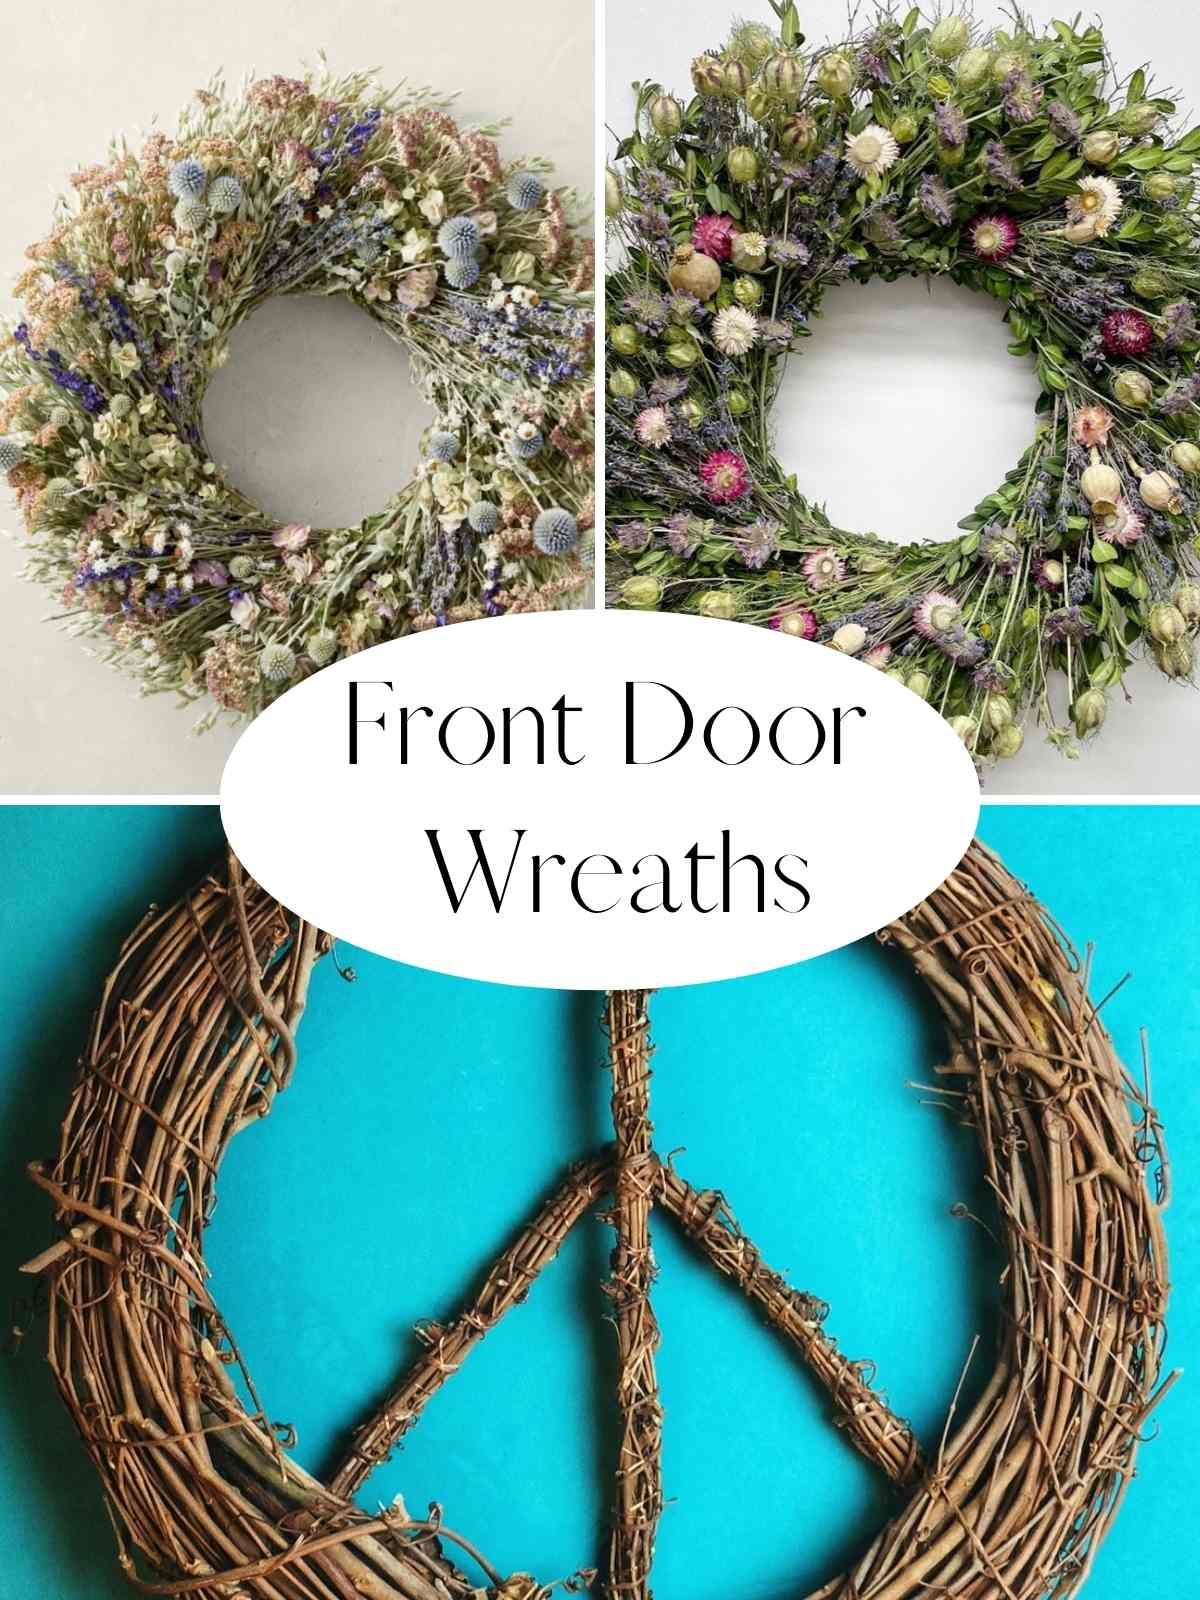 Front door wreaths that are Boho style